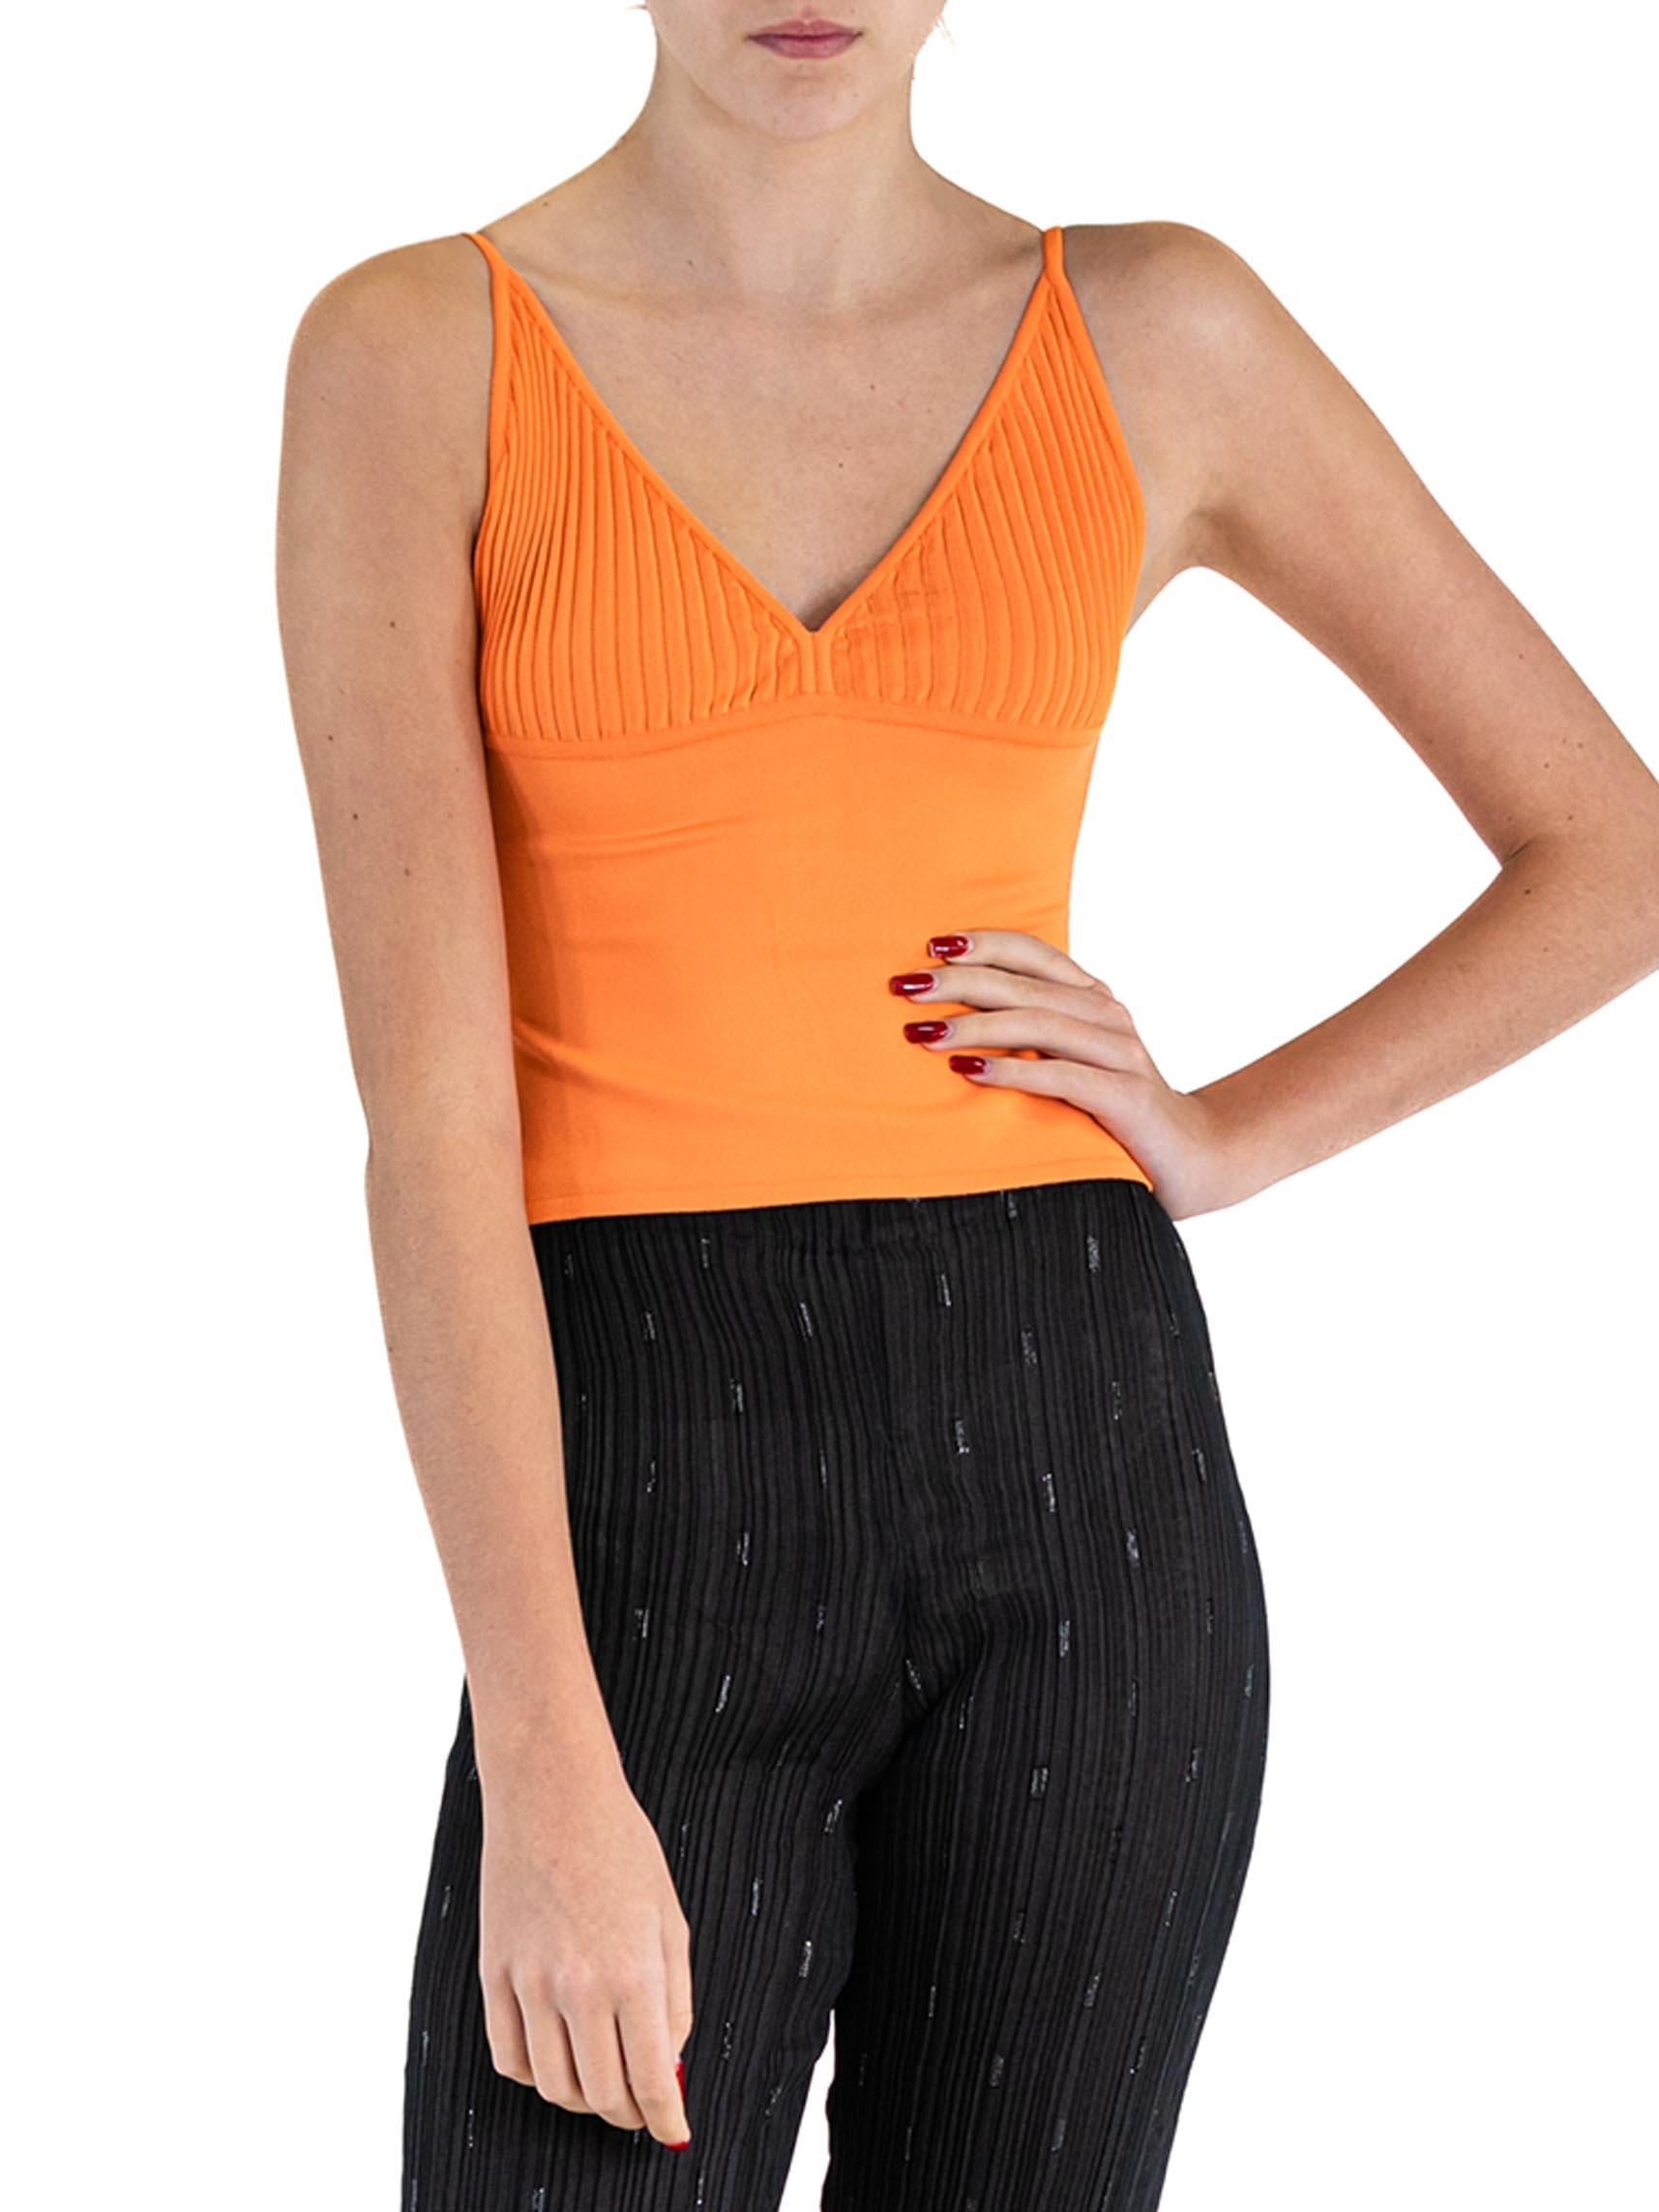 Women's 1990S HERVE LEGER Orange Rayon Blend Ribbed Knit Top For Sale